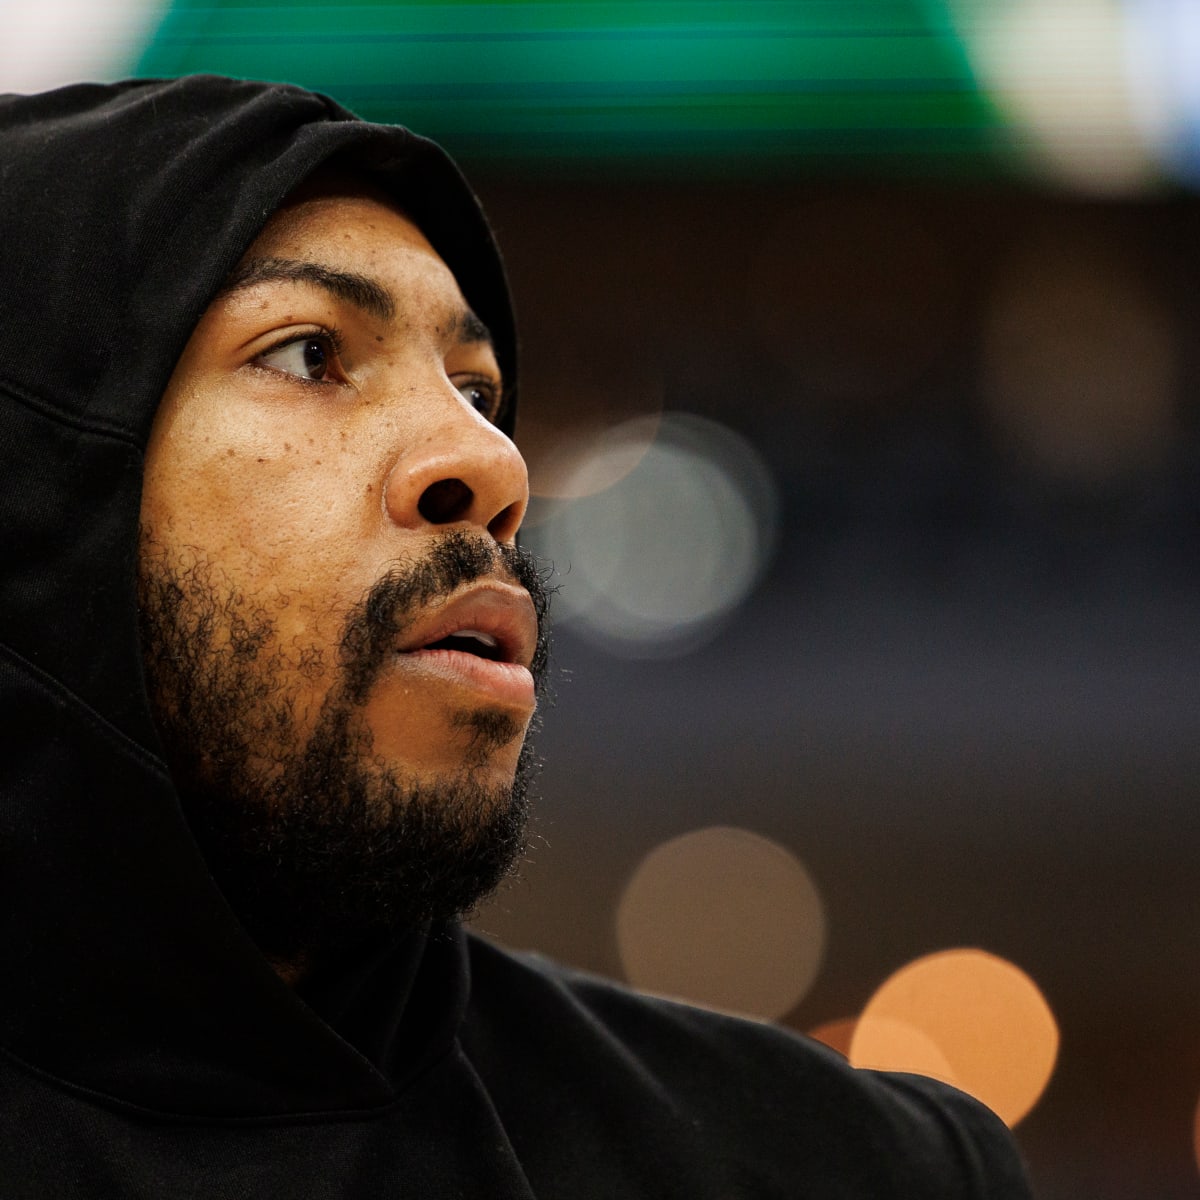 Bulls News: Jevon Carter Gets Honest About Joining CHI